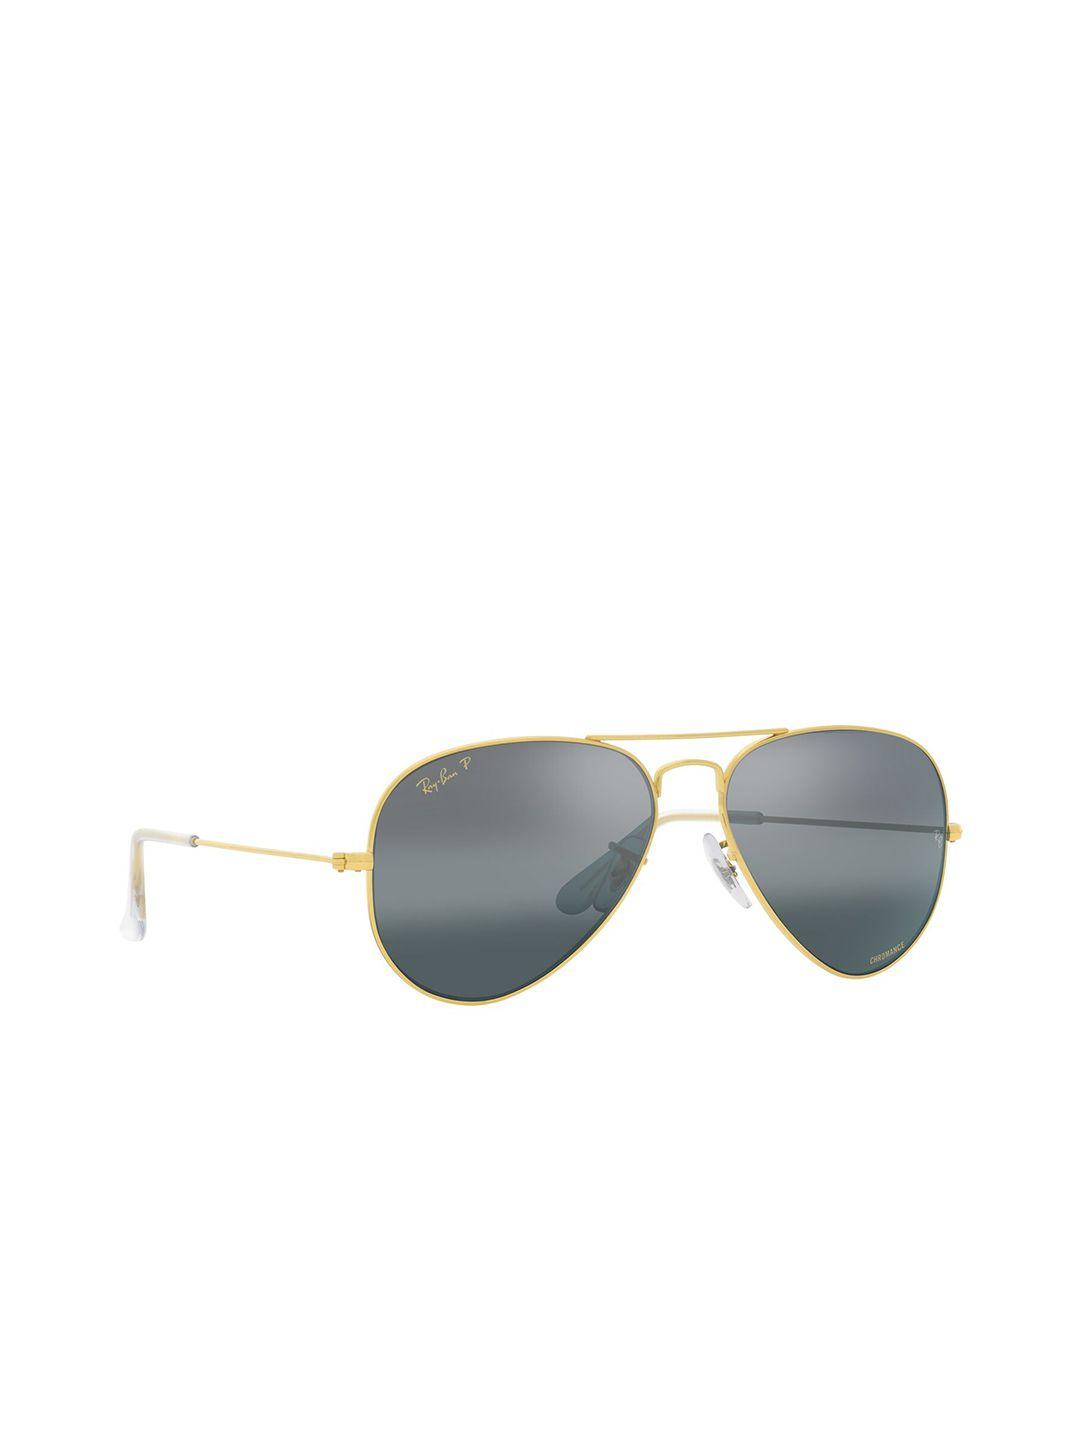 ray-ban lens & gold-toned aviator sunglasses with polarised lens 8056597662338